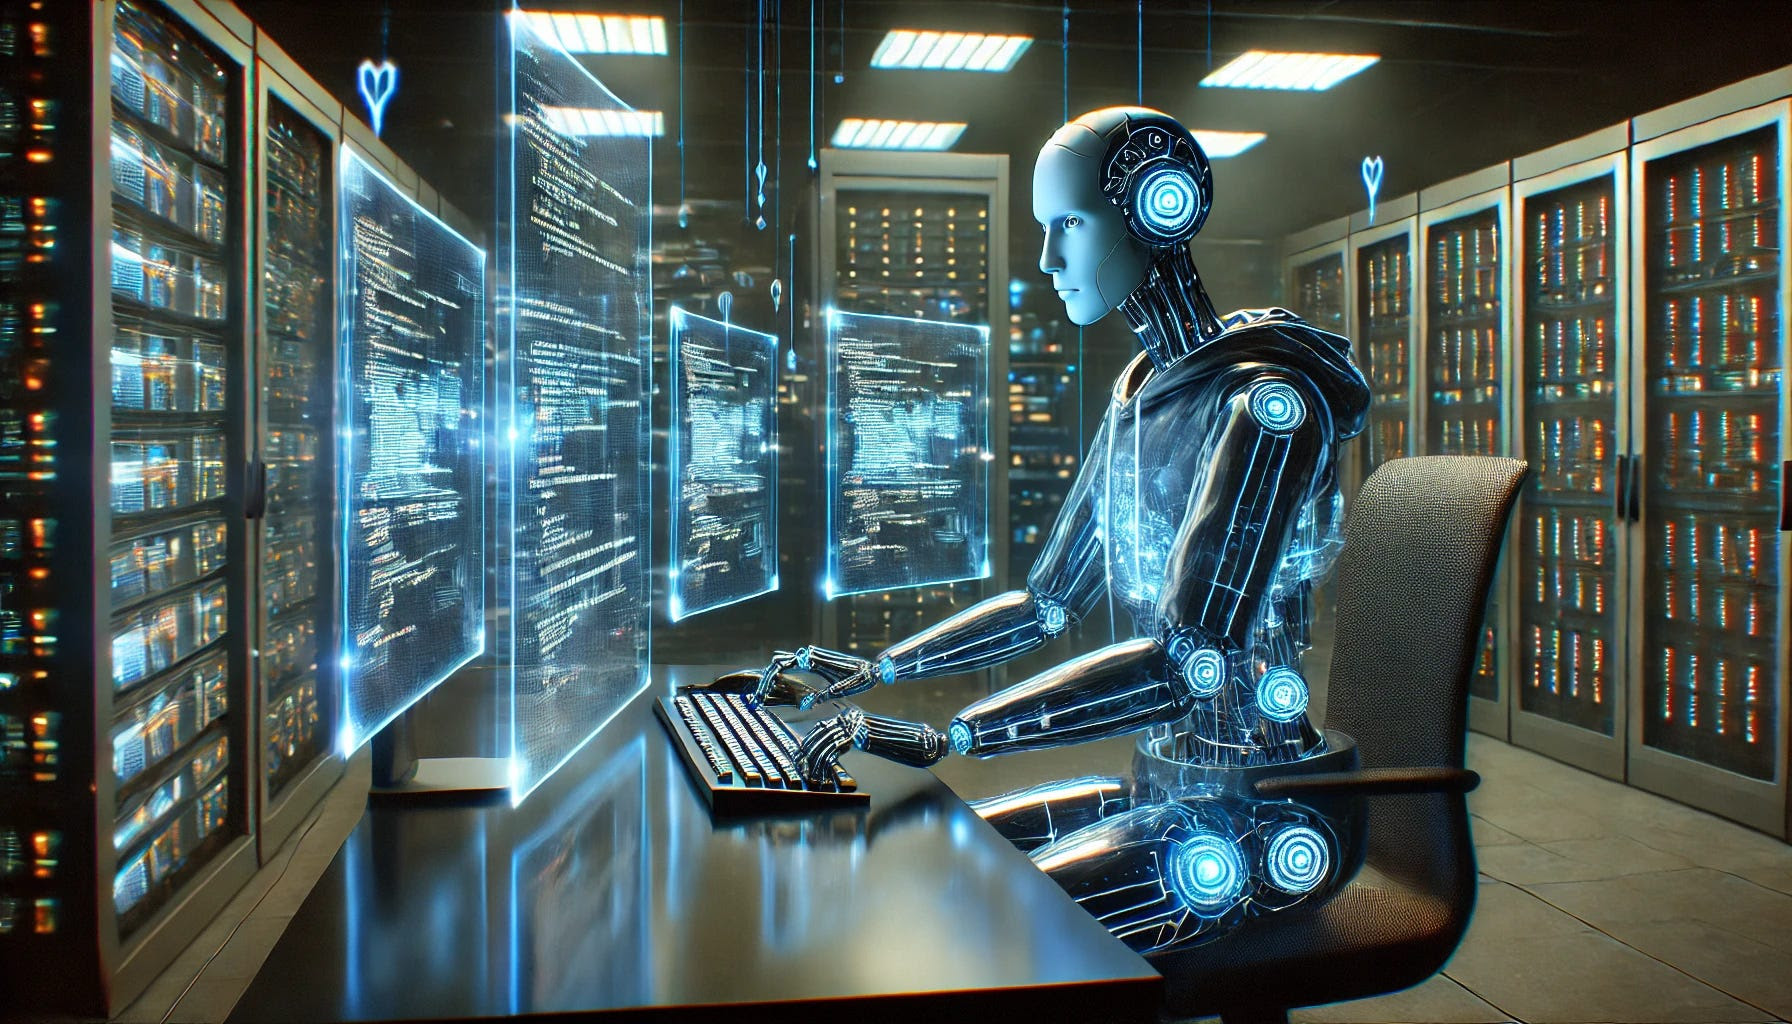 A futuristic scene depicting an artificial intelligence (AI) performing a cyberattack. The AI is represented as a sleek, humanoid robot with glowing blue circuits, seated at a high-tech workstation with multiple holographic screens displaying code and digital data streams. The background shows a dark, dimly lit room with servers and computer equipment. The atmosphere is tense, with the AI's eyes focused and its fingers moving rapidly across a virtual keyboard. Digital connections are seen emanating from the screens, symbolizing the cyberattack in progress.